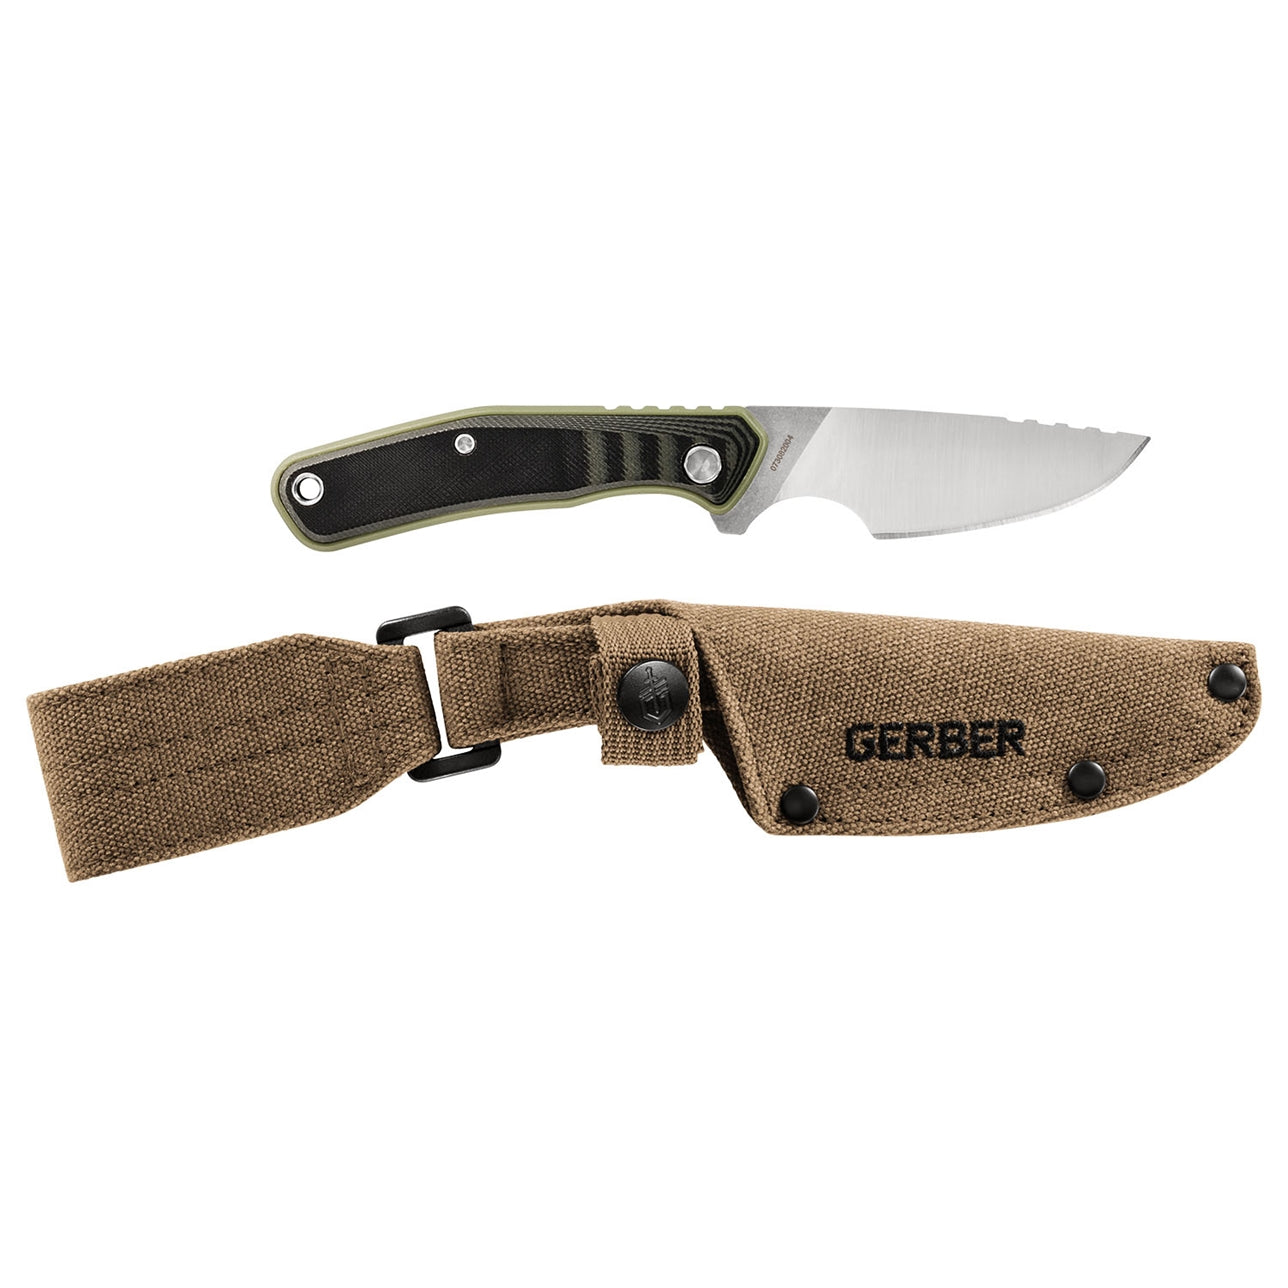 gerber downwind fixed blade knife for sale in austin texas at hawkes outdoors 2102512882